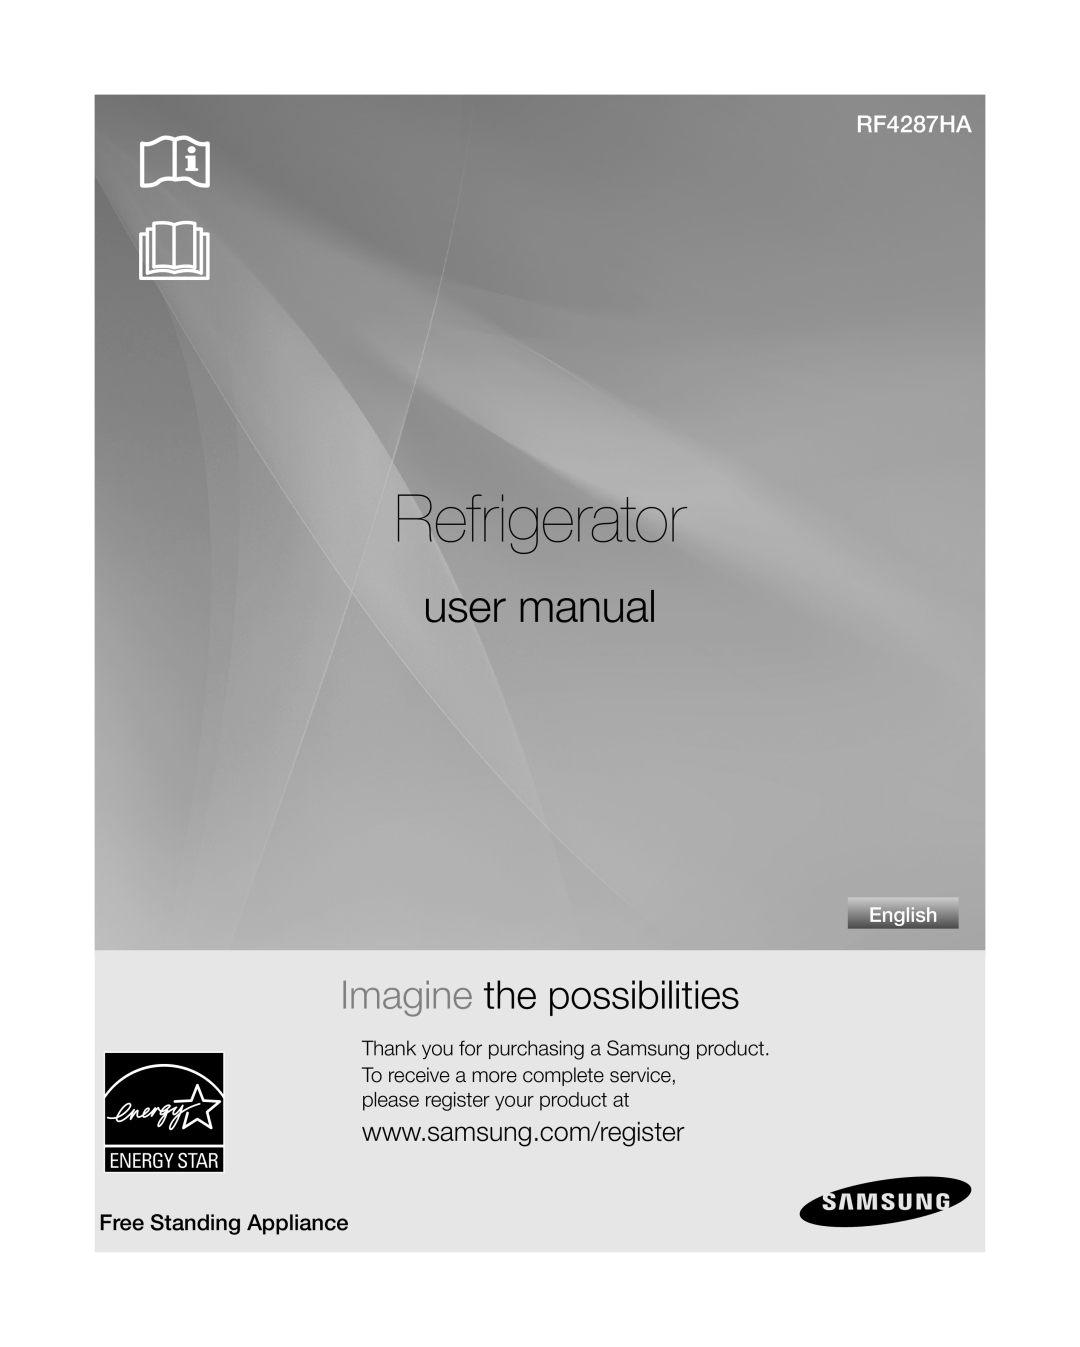 Samsung RF4287HA user manual please register your product at, Refrigerator, Imagine the possibilities, English 